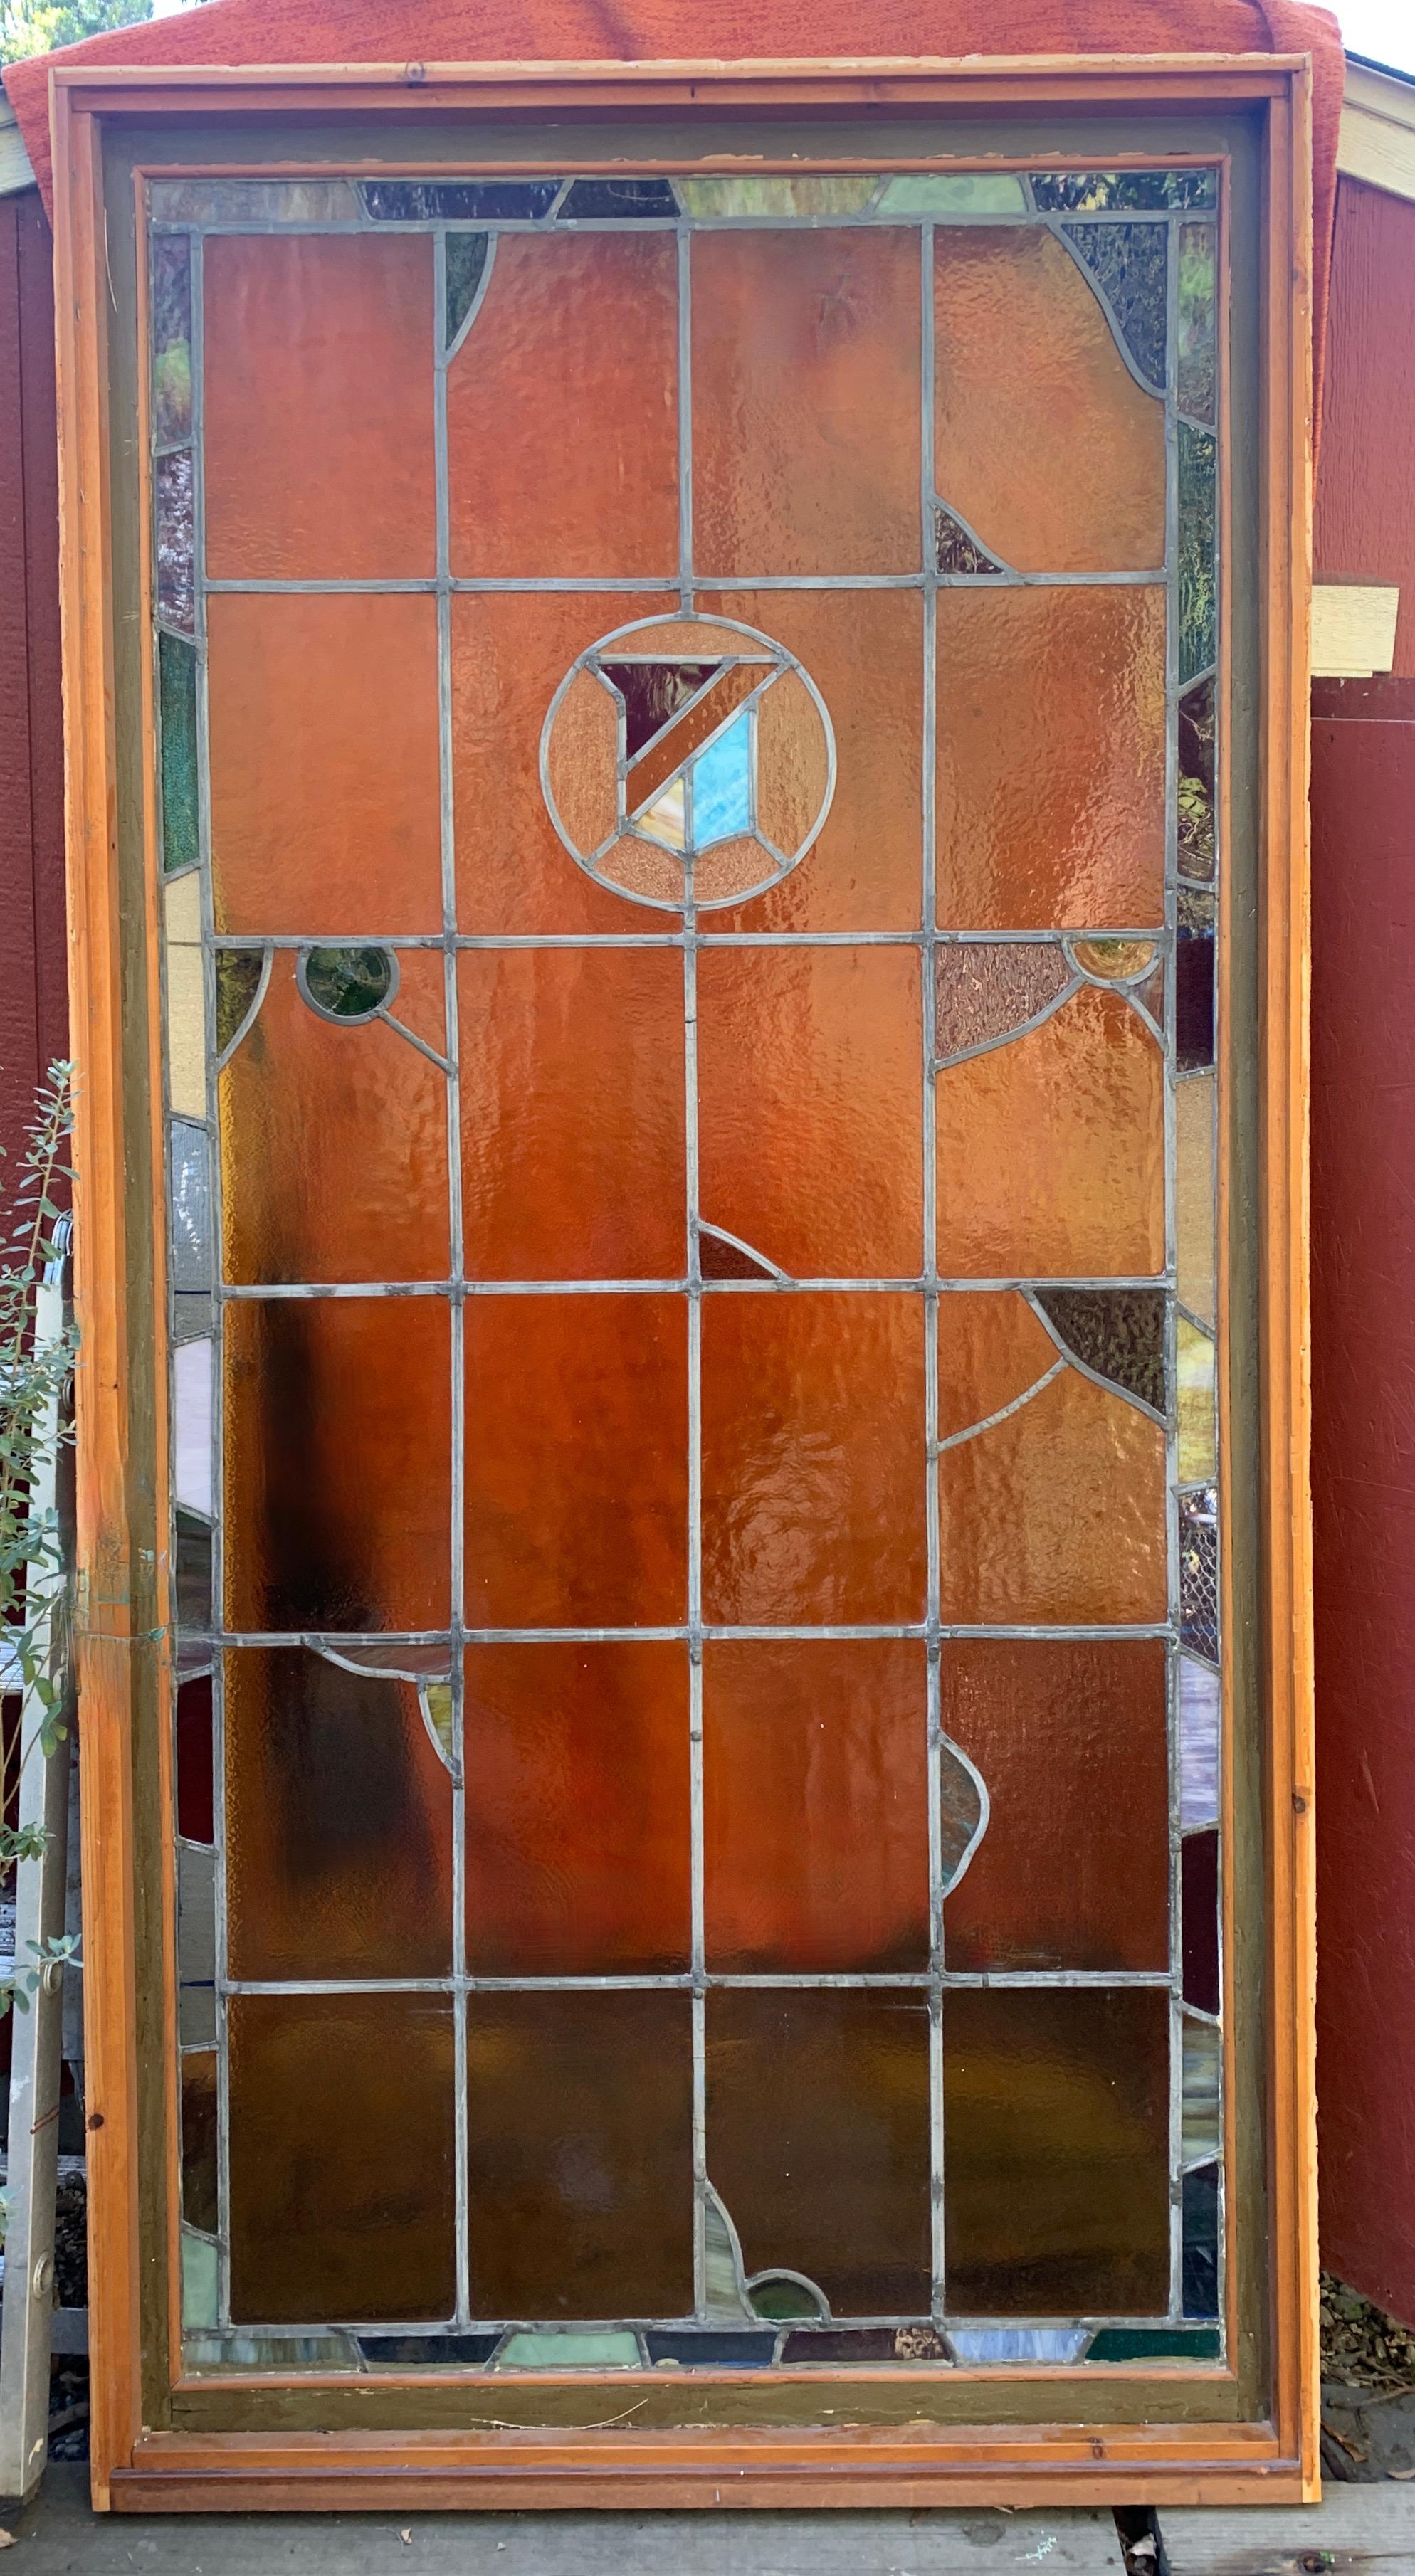 Architectural Stained Glass Window in Frame 8